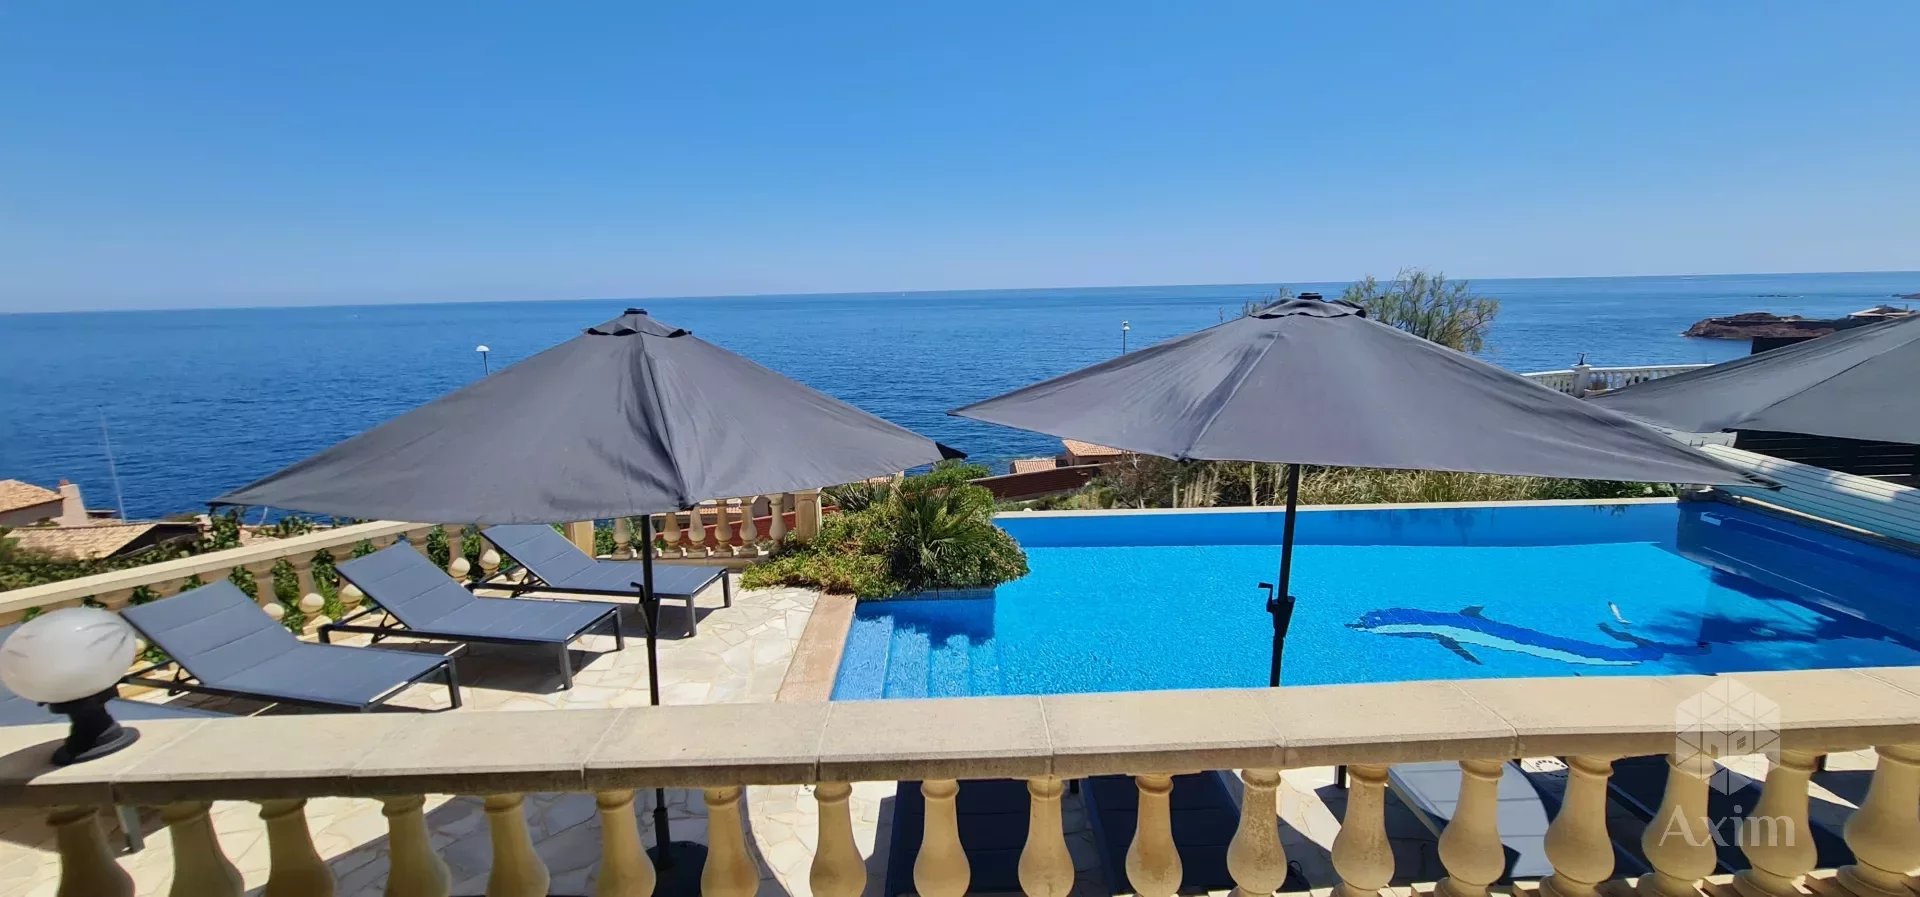 Air-conditioned villa, 12 people, facing the sea, heated swimming pool, beach at 200 m